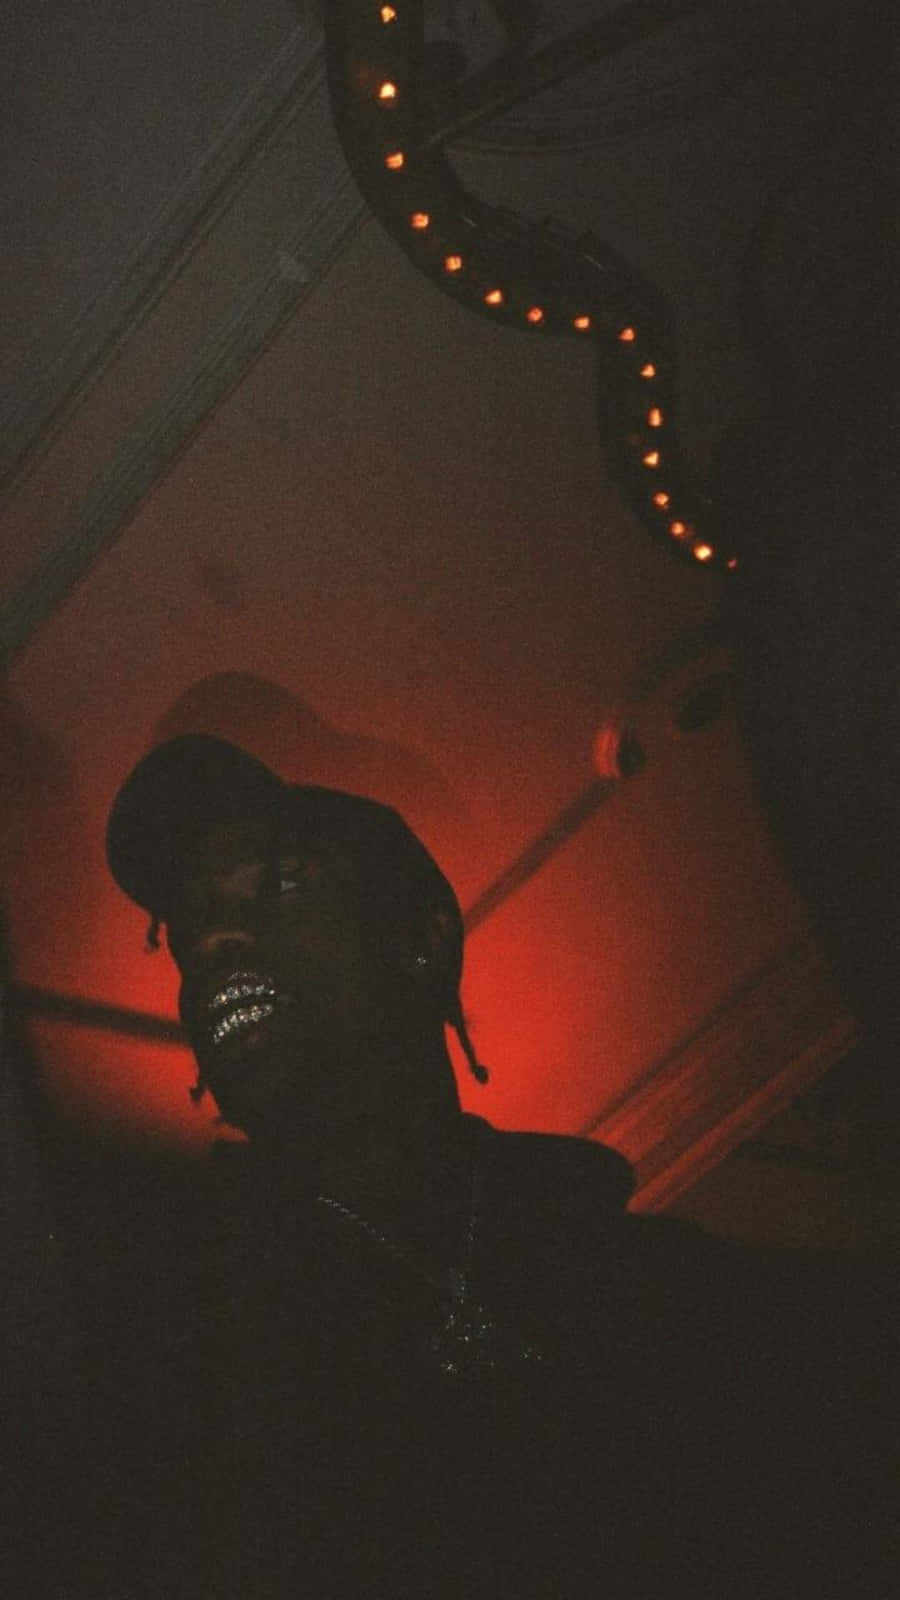 A man with a face mask and a black hoodie in a dark room with red light - Travis Scott